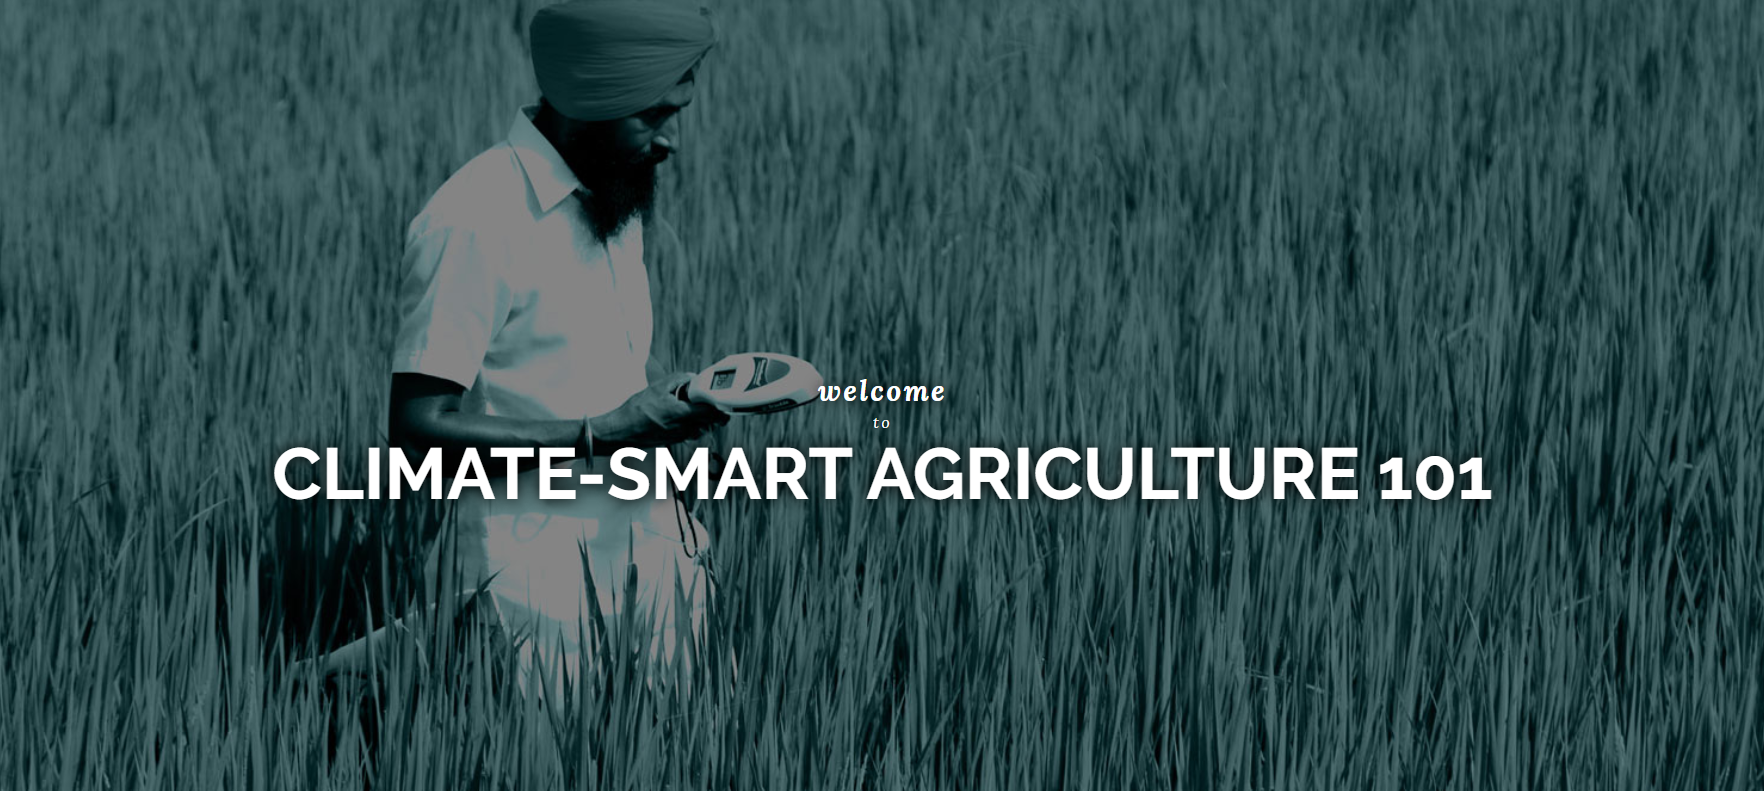 Welcome to climate-smart agriculture 101